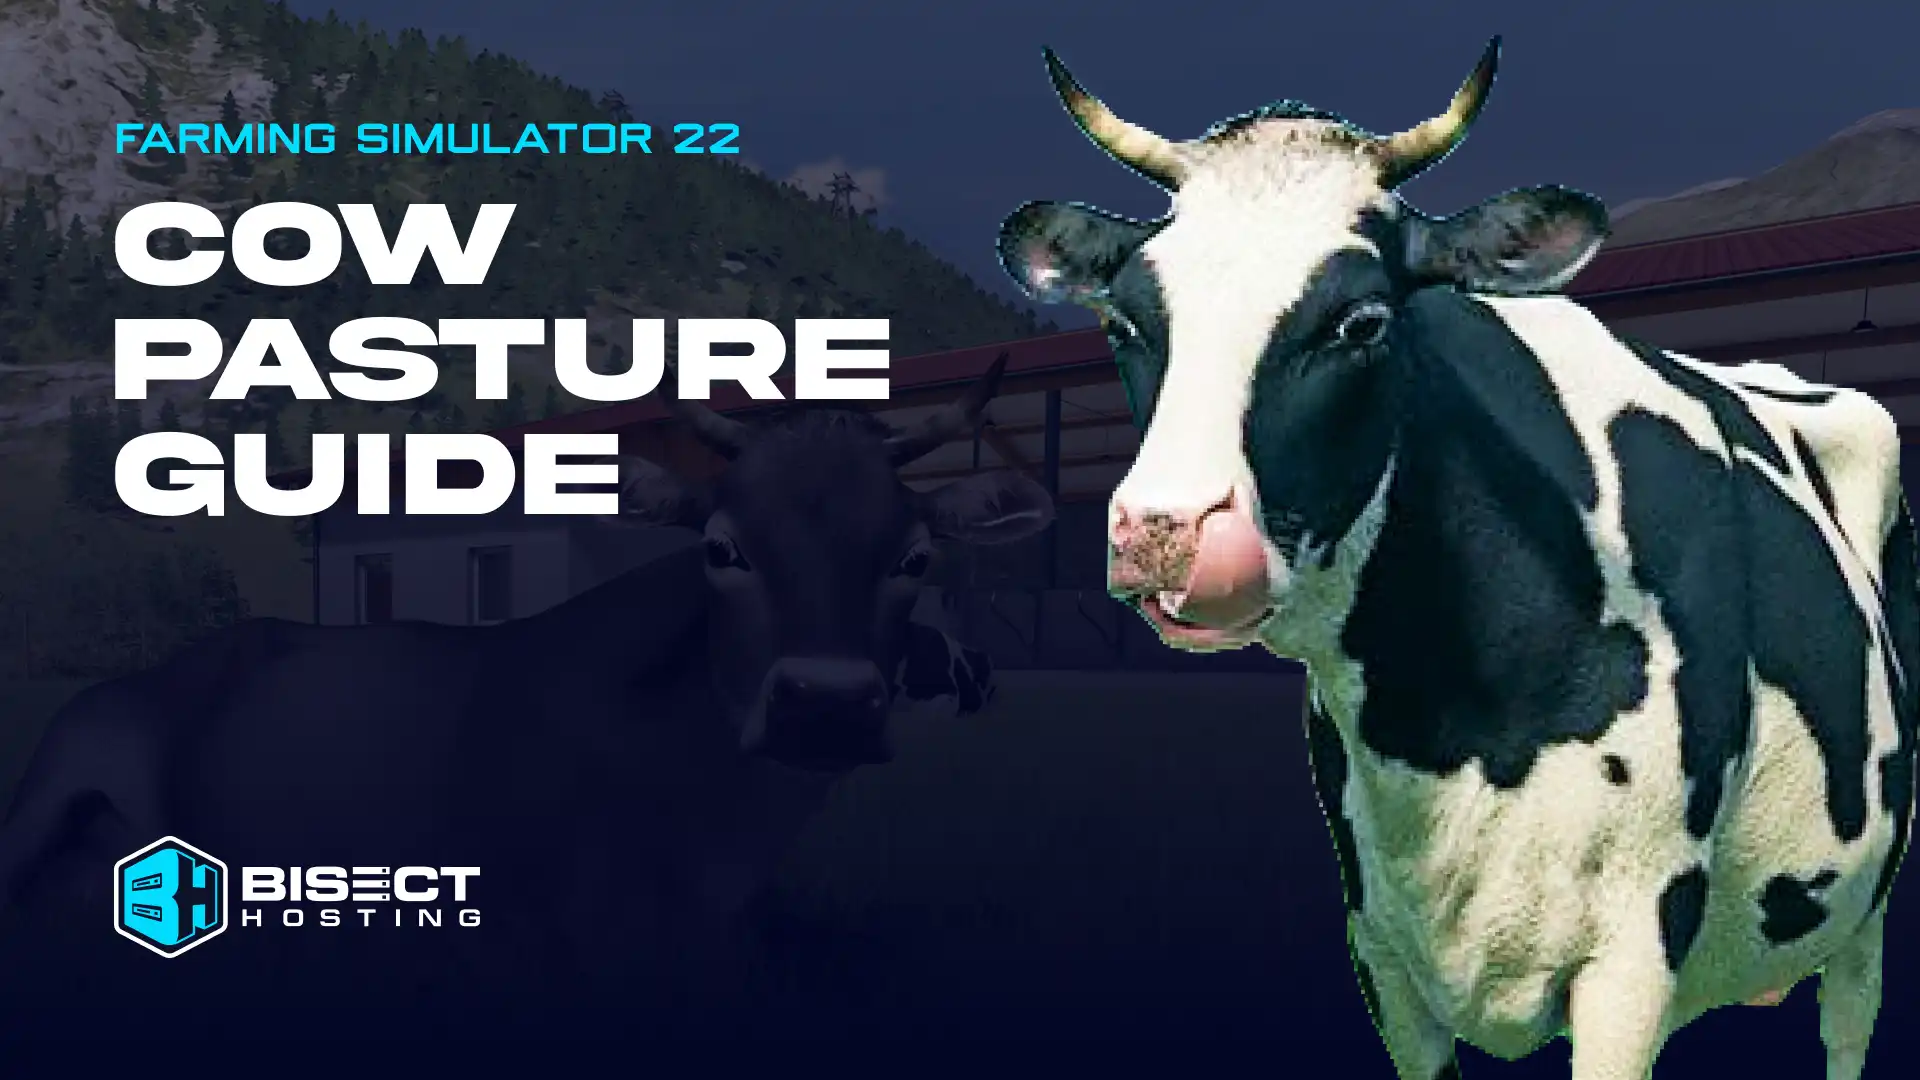 Farming Simulator 22 Cow Pasture and Barn Guide: How to Farm and Sell Cattle